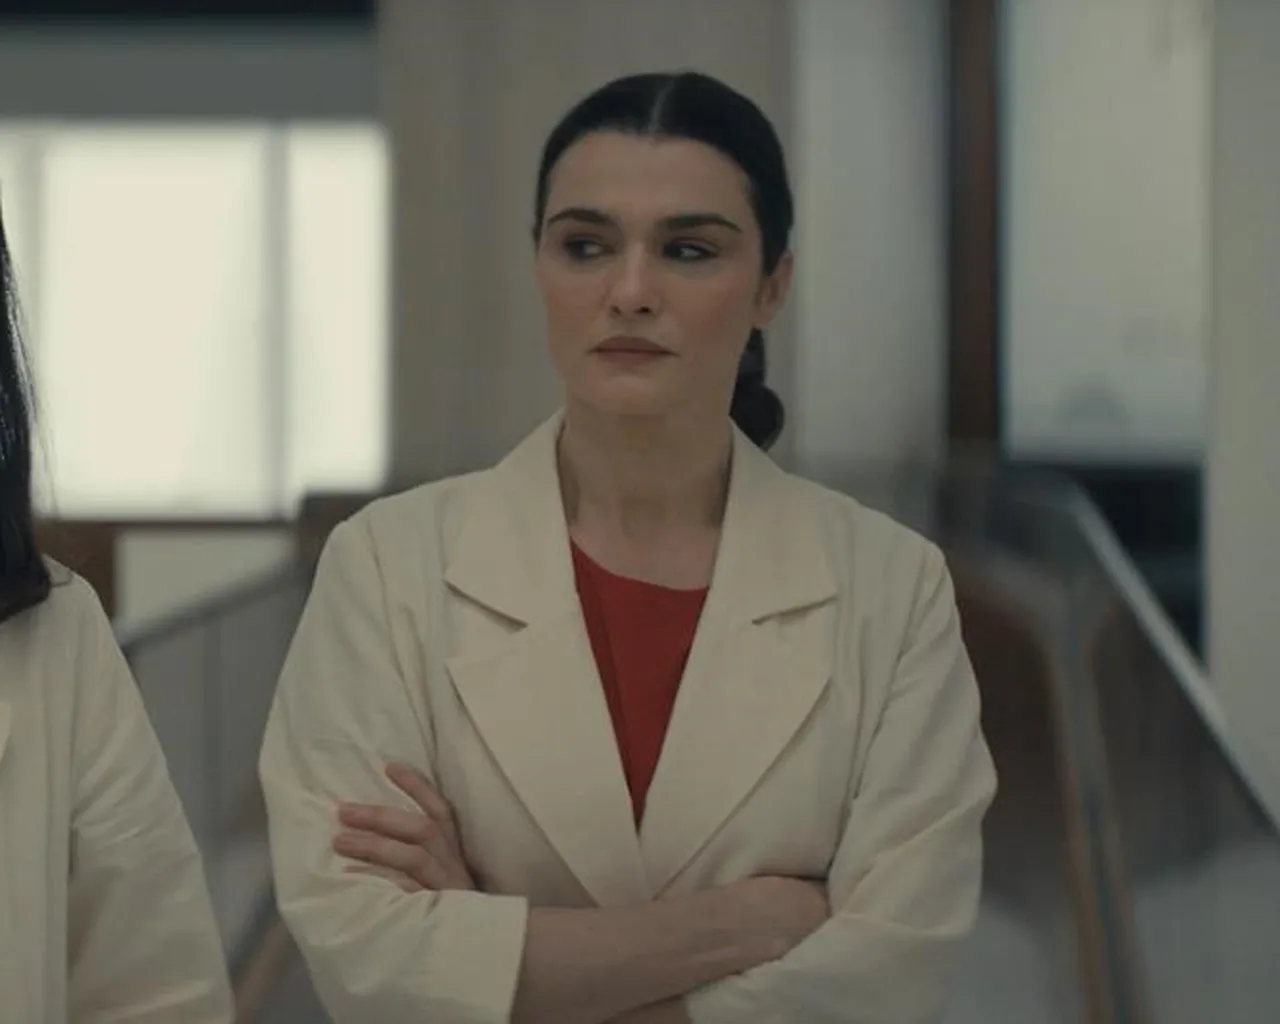 Dead Ringers review: a darkly funny sci-fi showcase for Rachel Weisz